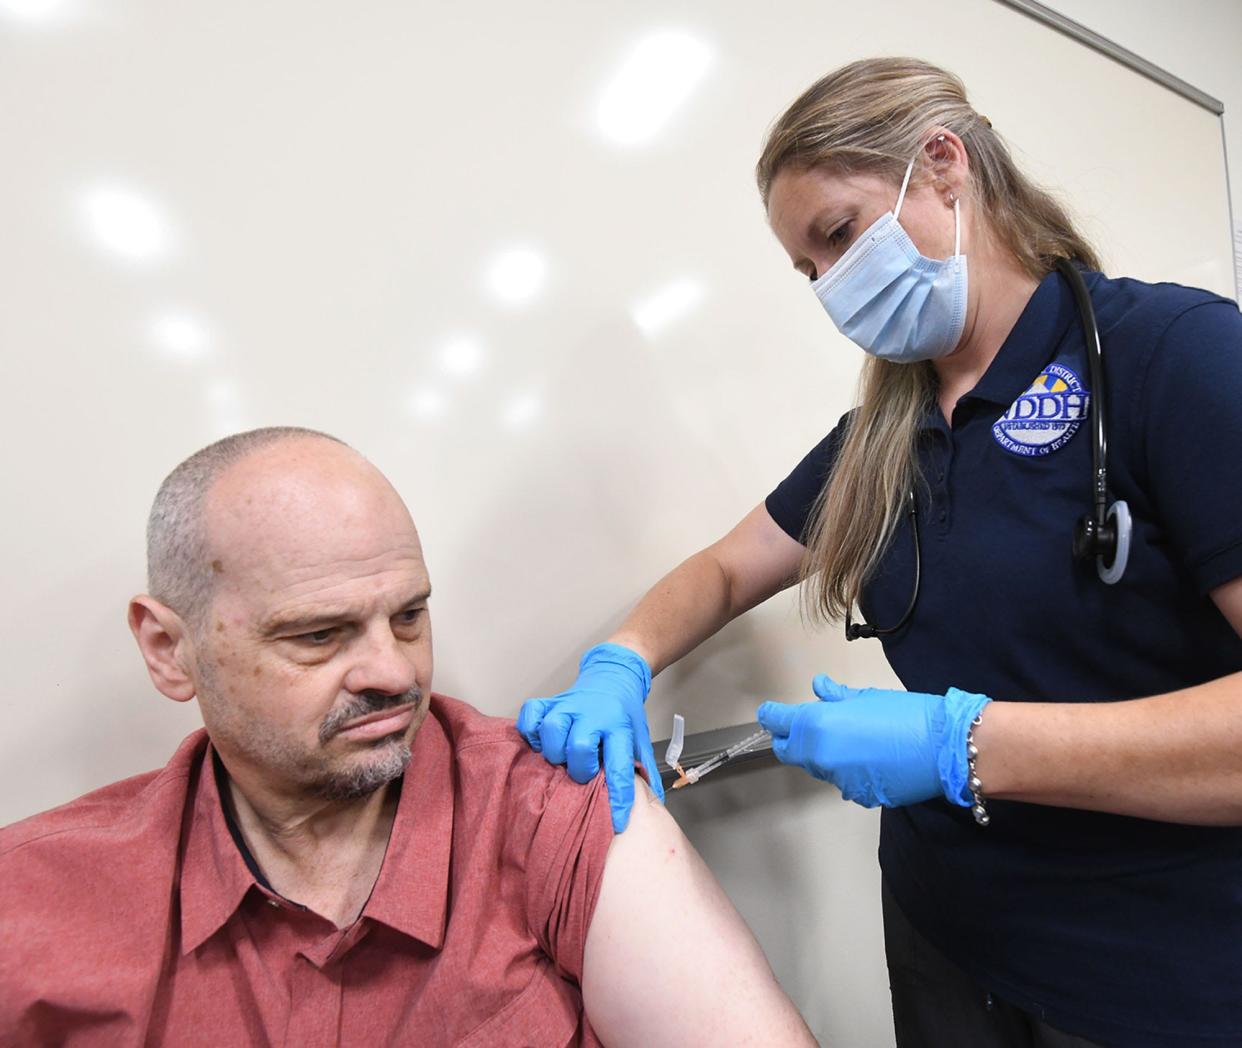 Marine veteran Neil Stanley of Dayville gets his second booster COVID-19 vaccination from public health nurse Janine Vose recently at Quinebaug Valley Community College in Dayville, Connecticut.